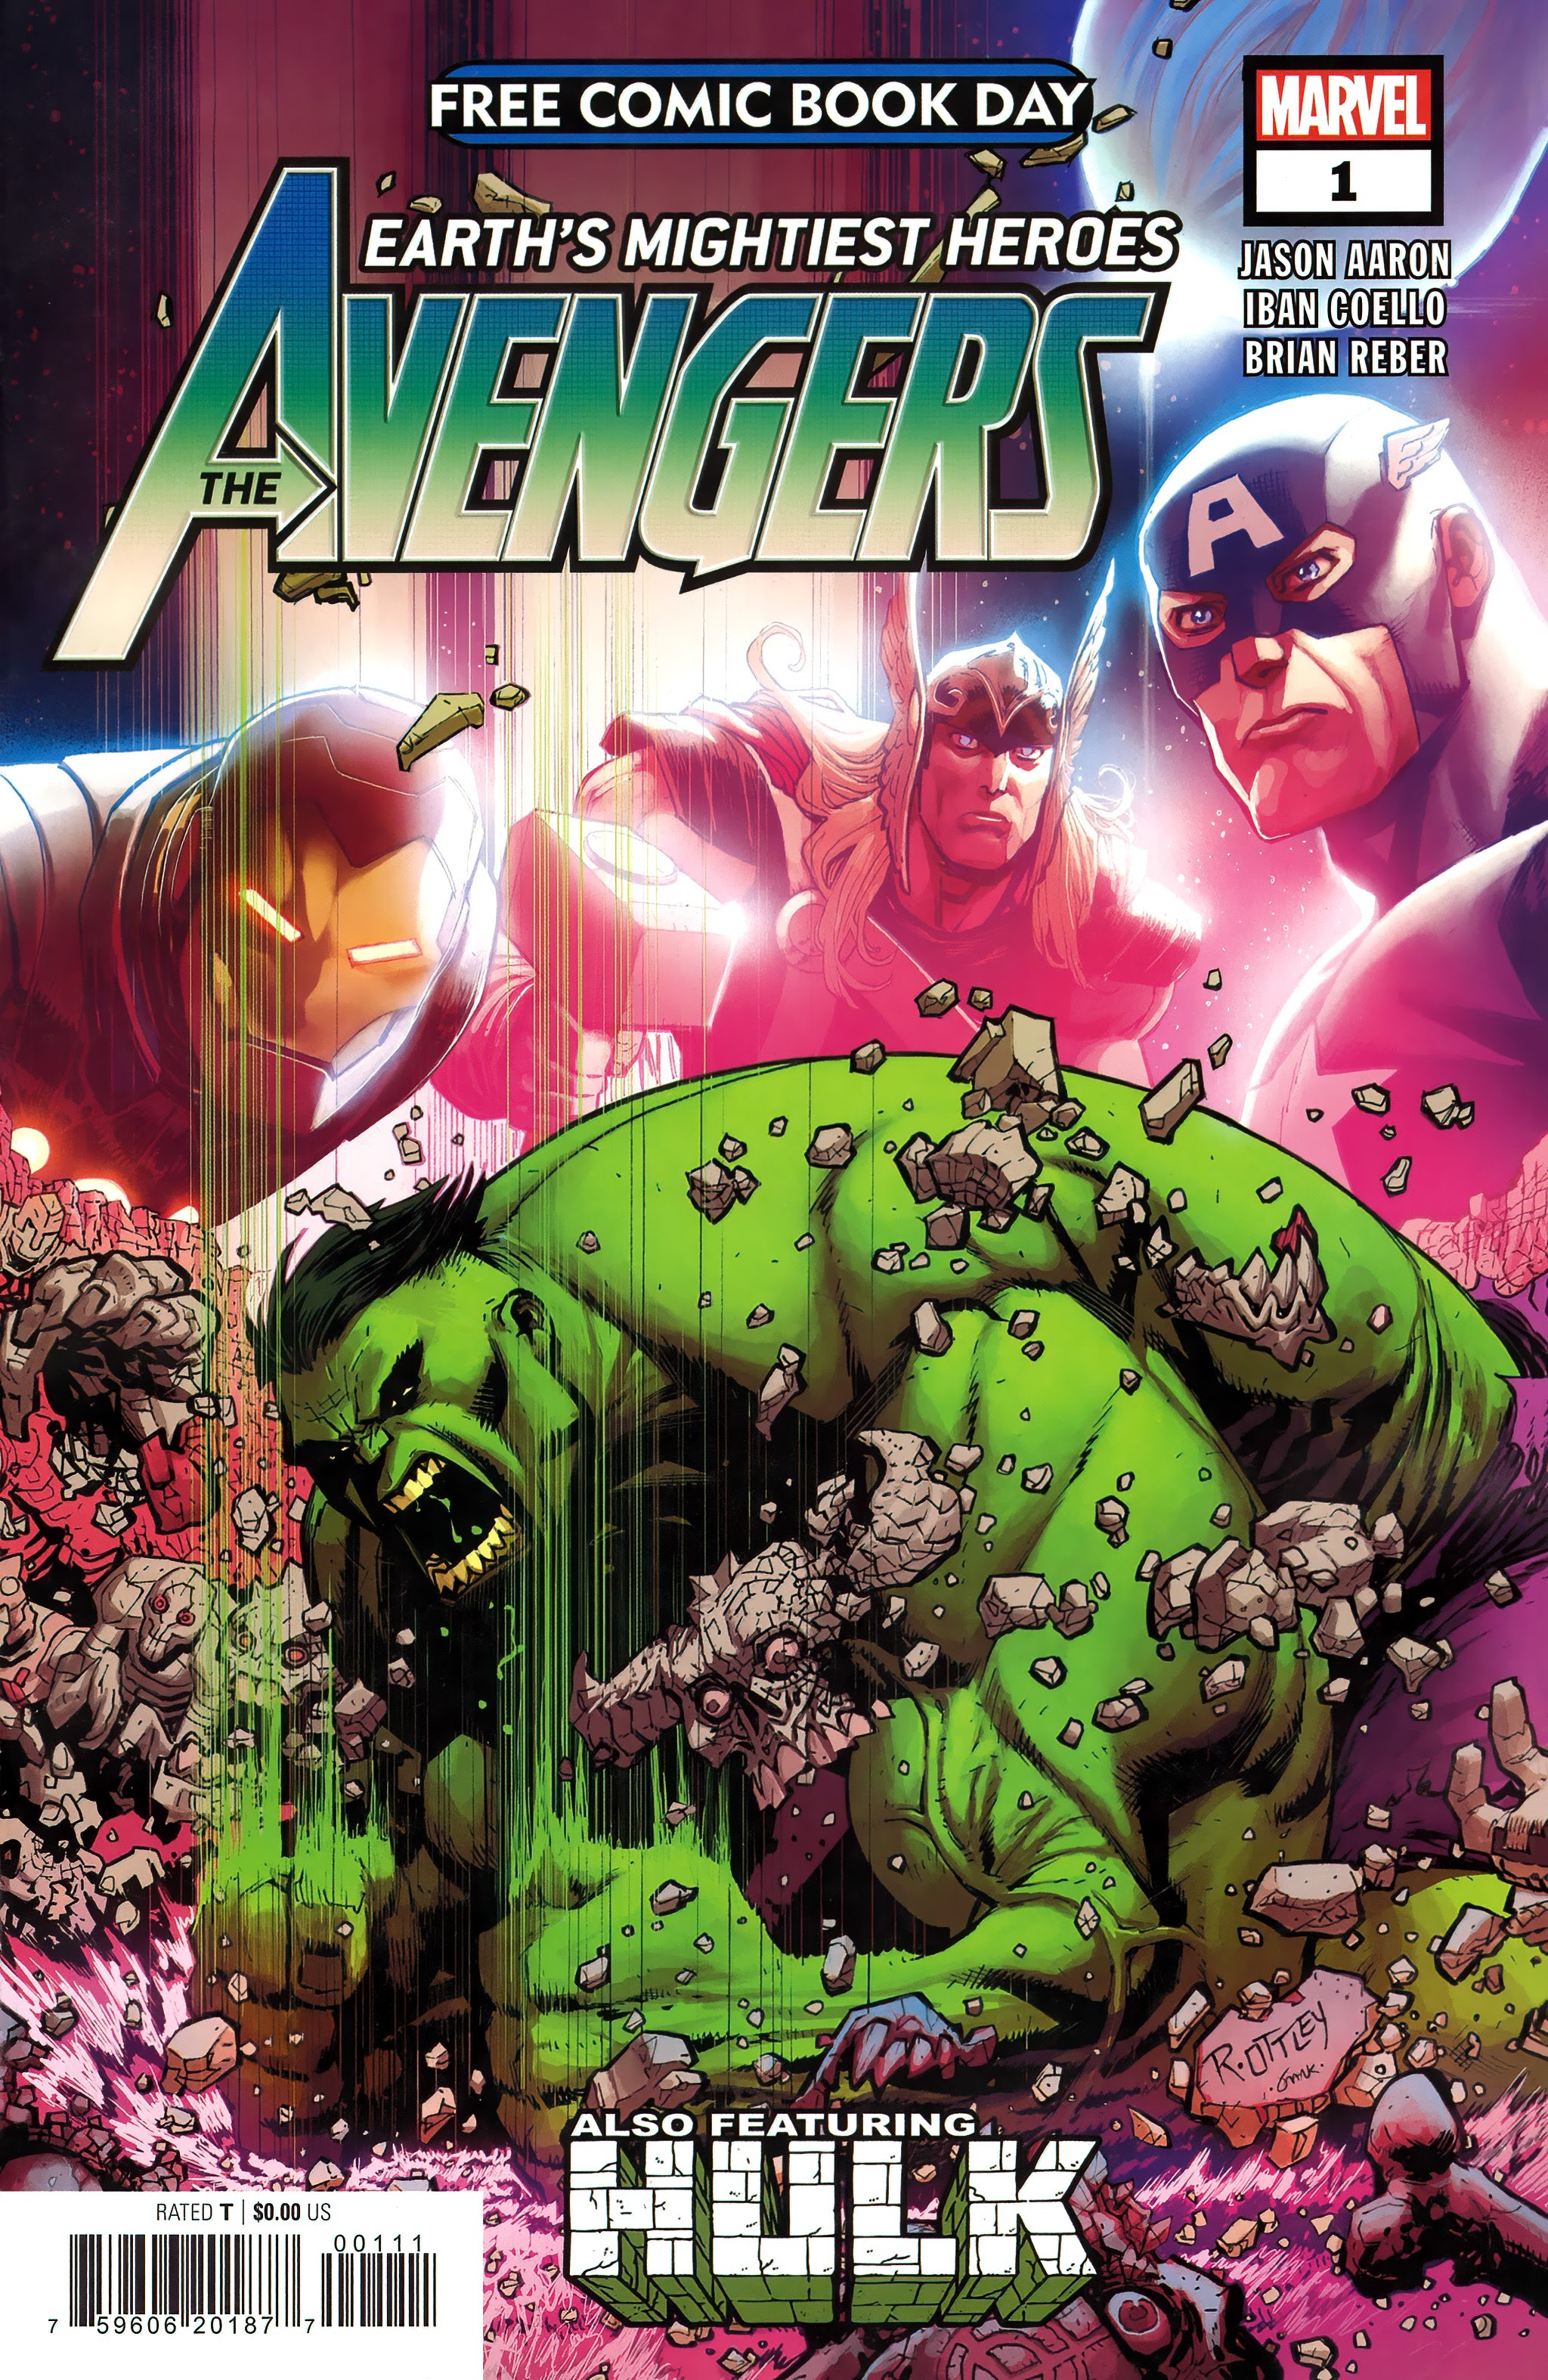 Read online Free Comic Book Day 2021 comic -  Issue # Avengers - Hulk - 1